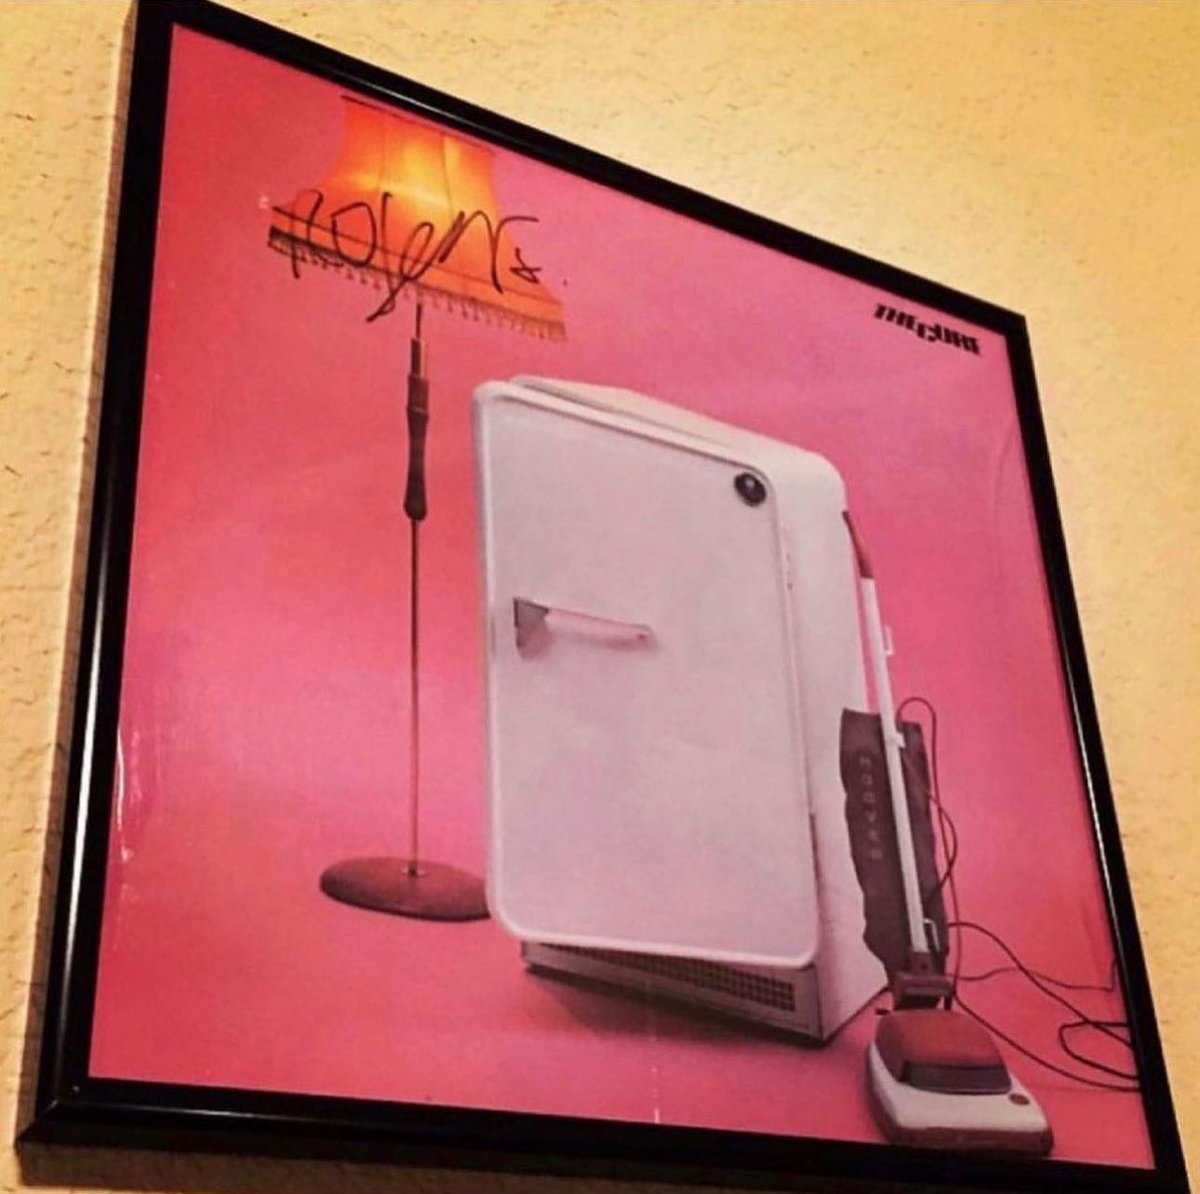 Released in the UK in May 1979, ‘Three Imaginary Boys’, the debut album by @TheCure. Featuring “10:15 Saturday Night”, “Fire in Cairo”, “Boys Don’t Cry” and the cover of @JimiHendrix’s “Foxey Lady.” My copy signed by @RobertSmith in 2001. Happy 45th anniversary!